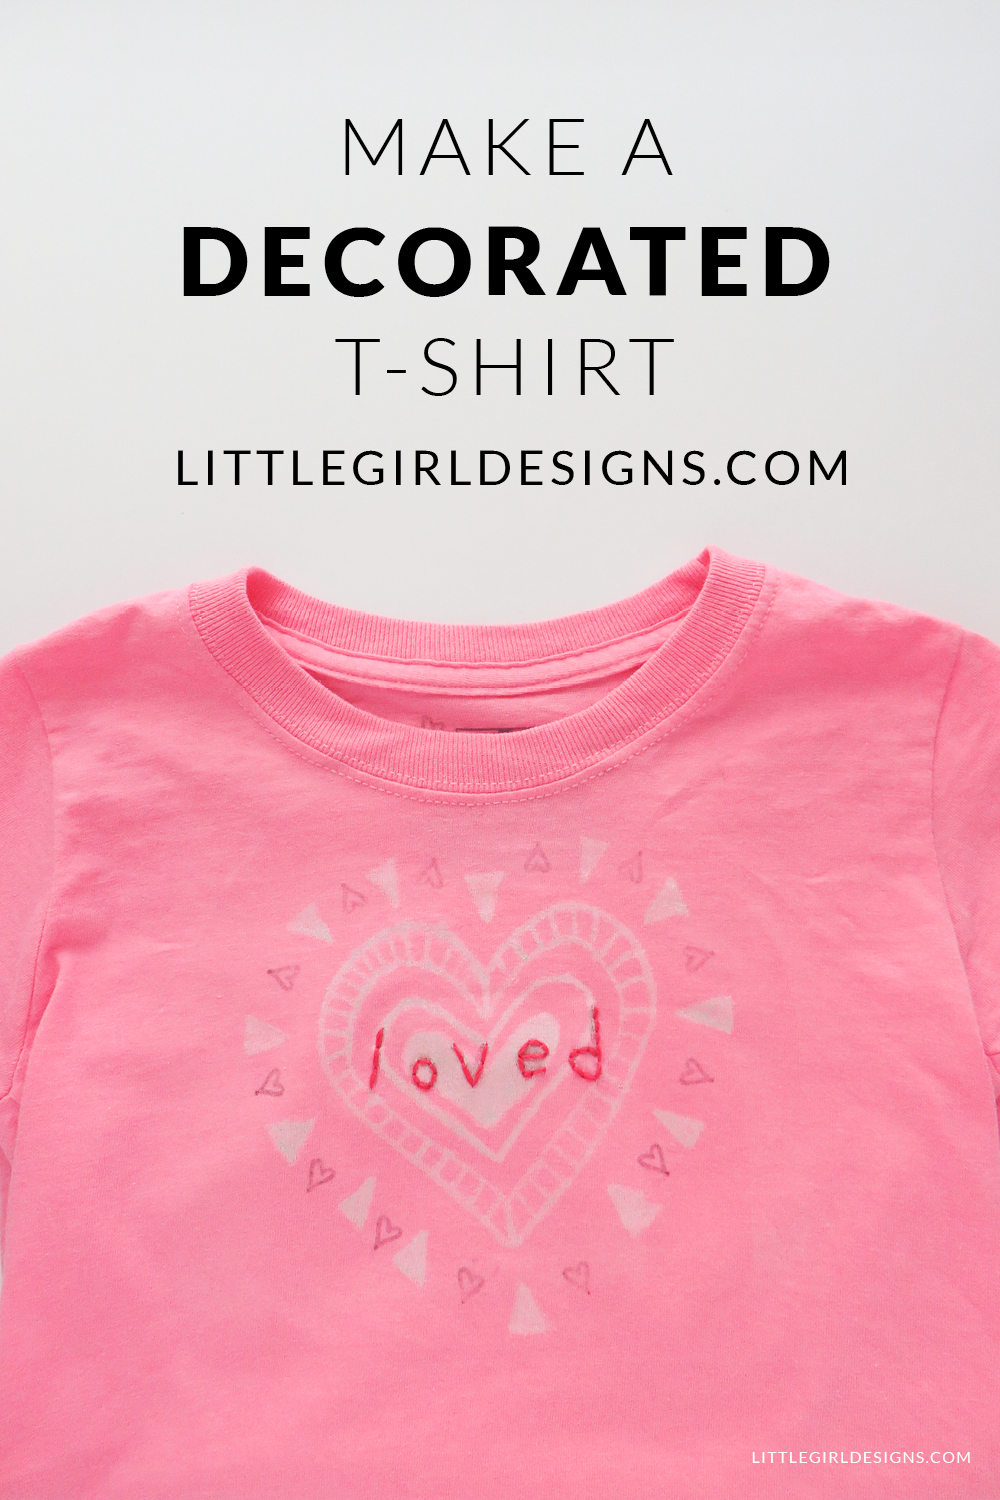 Make a Decorated T-shirt